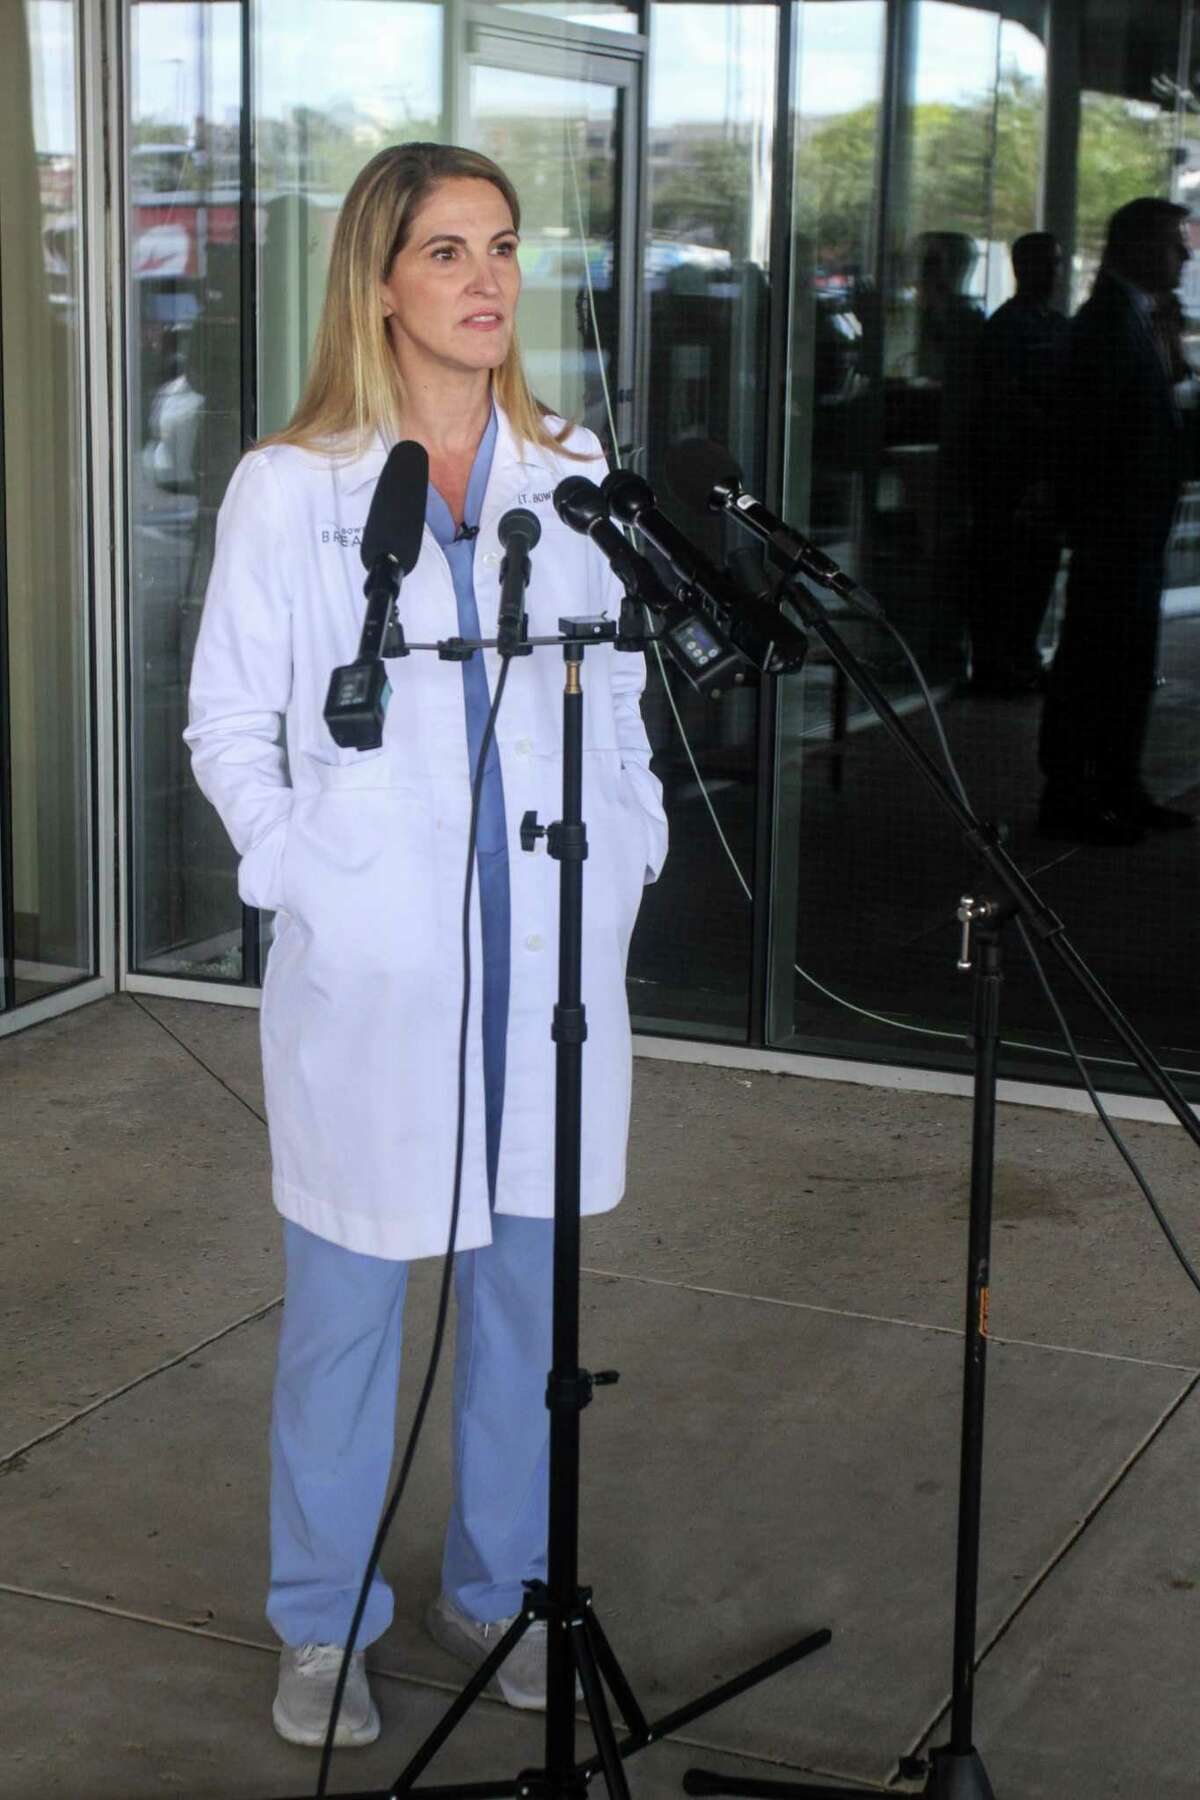 Dr. Mary Bowden, whose hospital privileges were suspended from Houston Methodist earlier this week for spreading COVID misinformation on social media, during a press conference at her office in Houston.